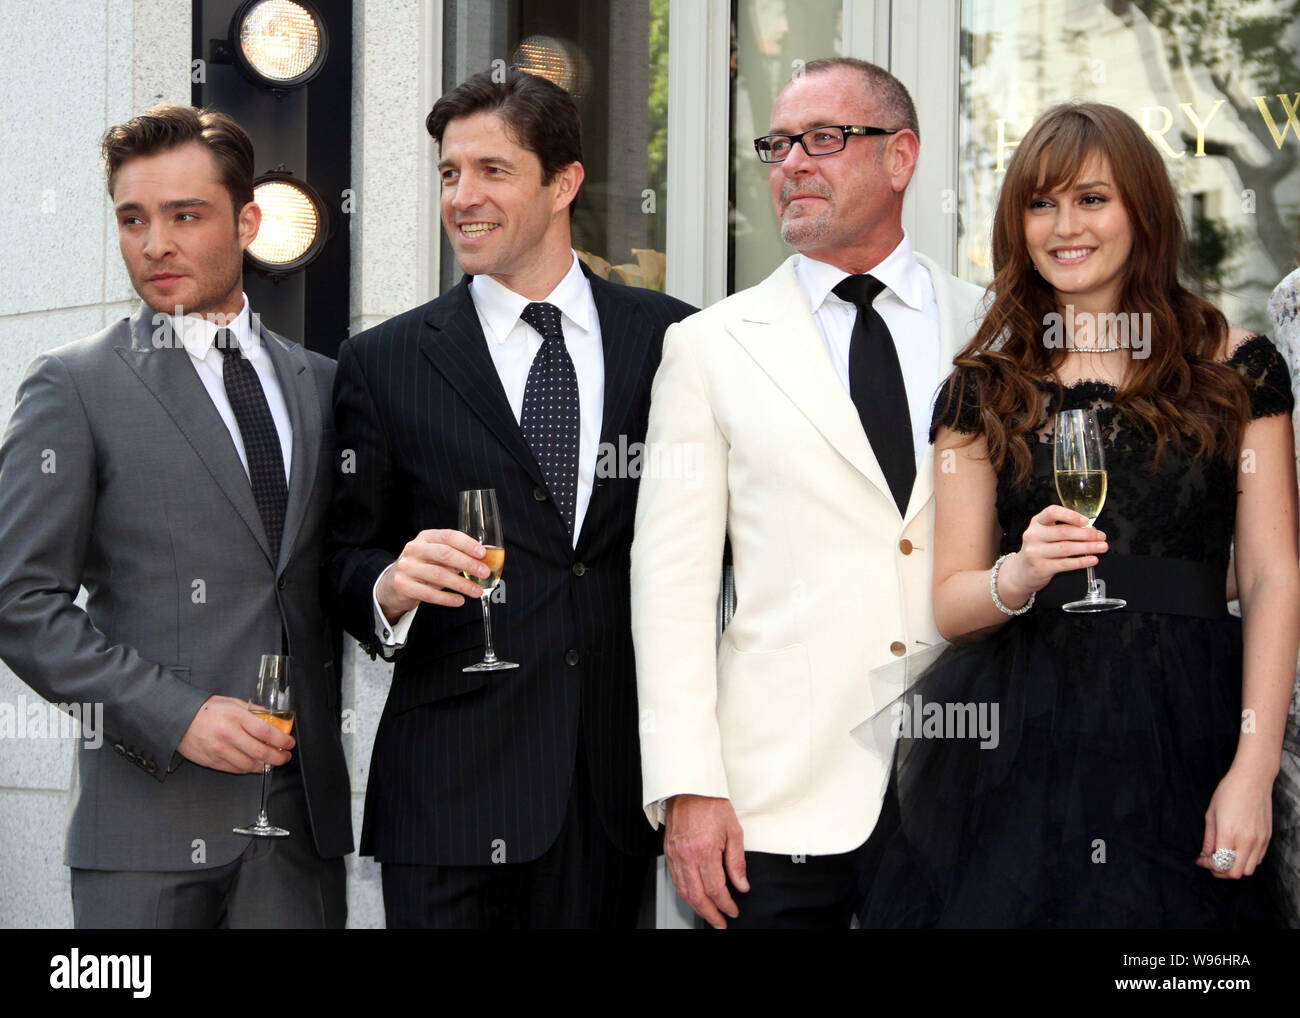 English actor Ed Westwick, left, and U.S. actress Leighton Meester attend a promotional event for U.S. jewellery brand Harry Winston in Xintiandi, a t Stock Photo